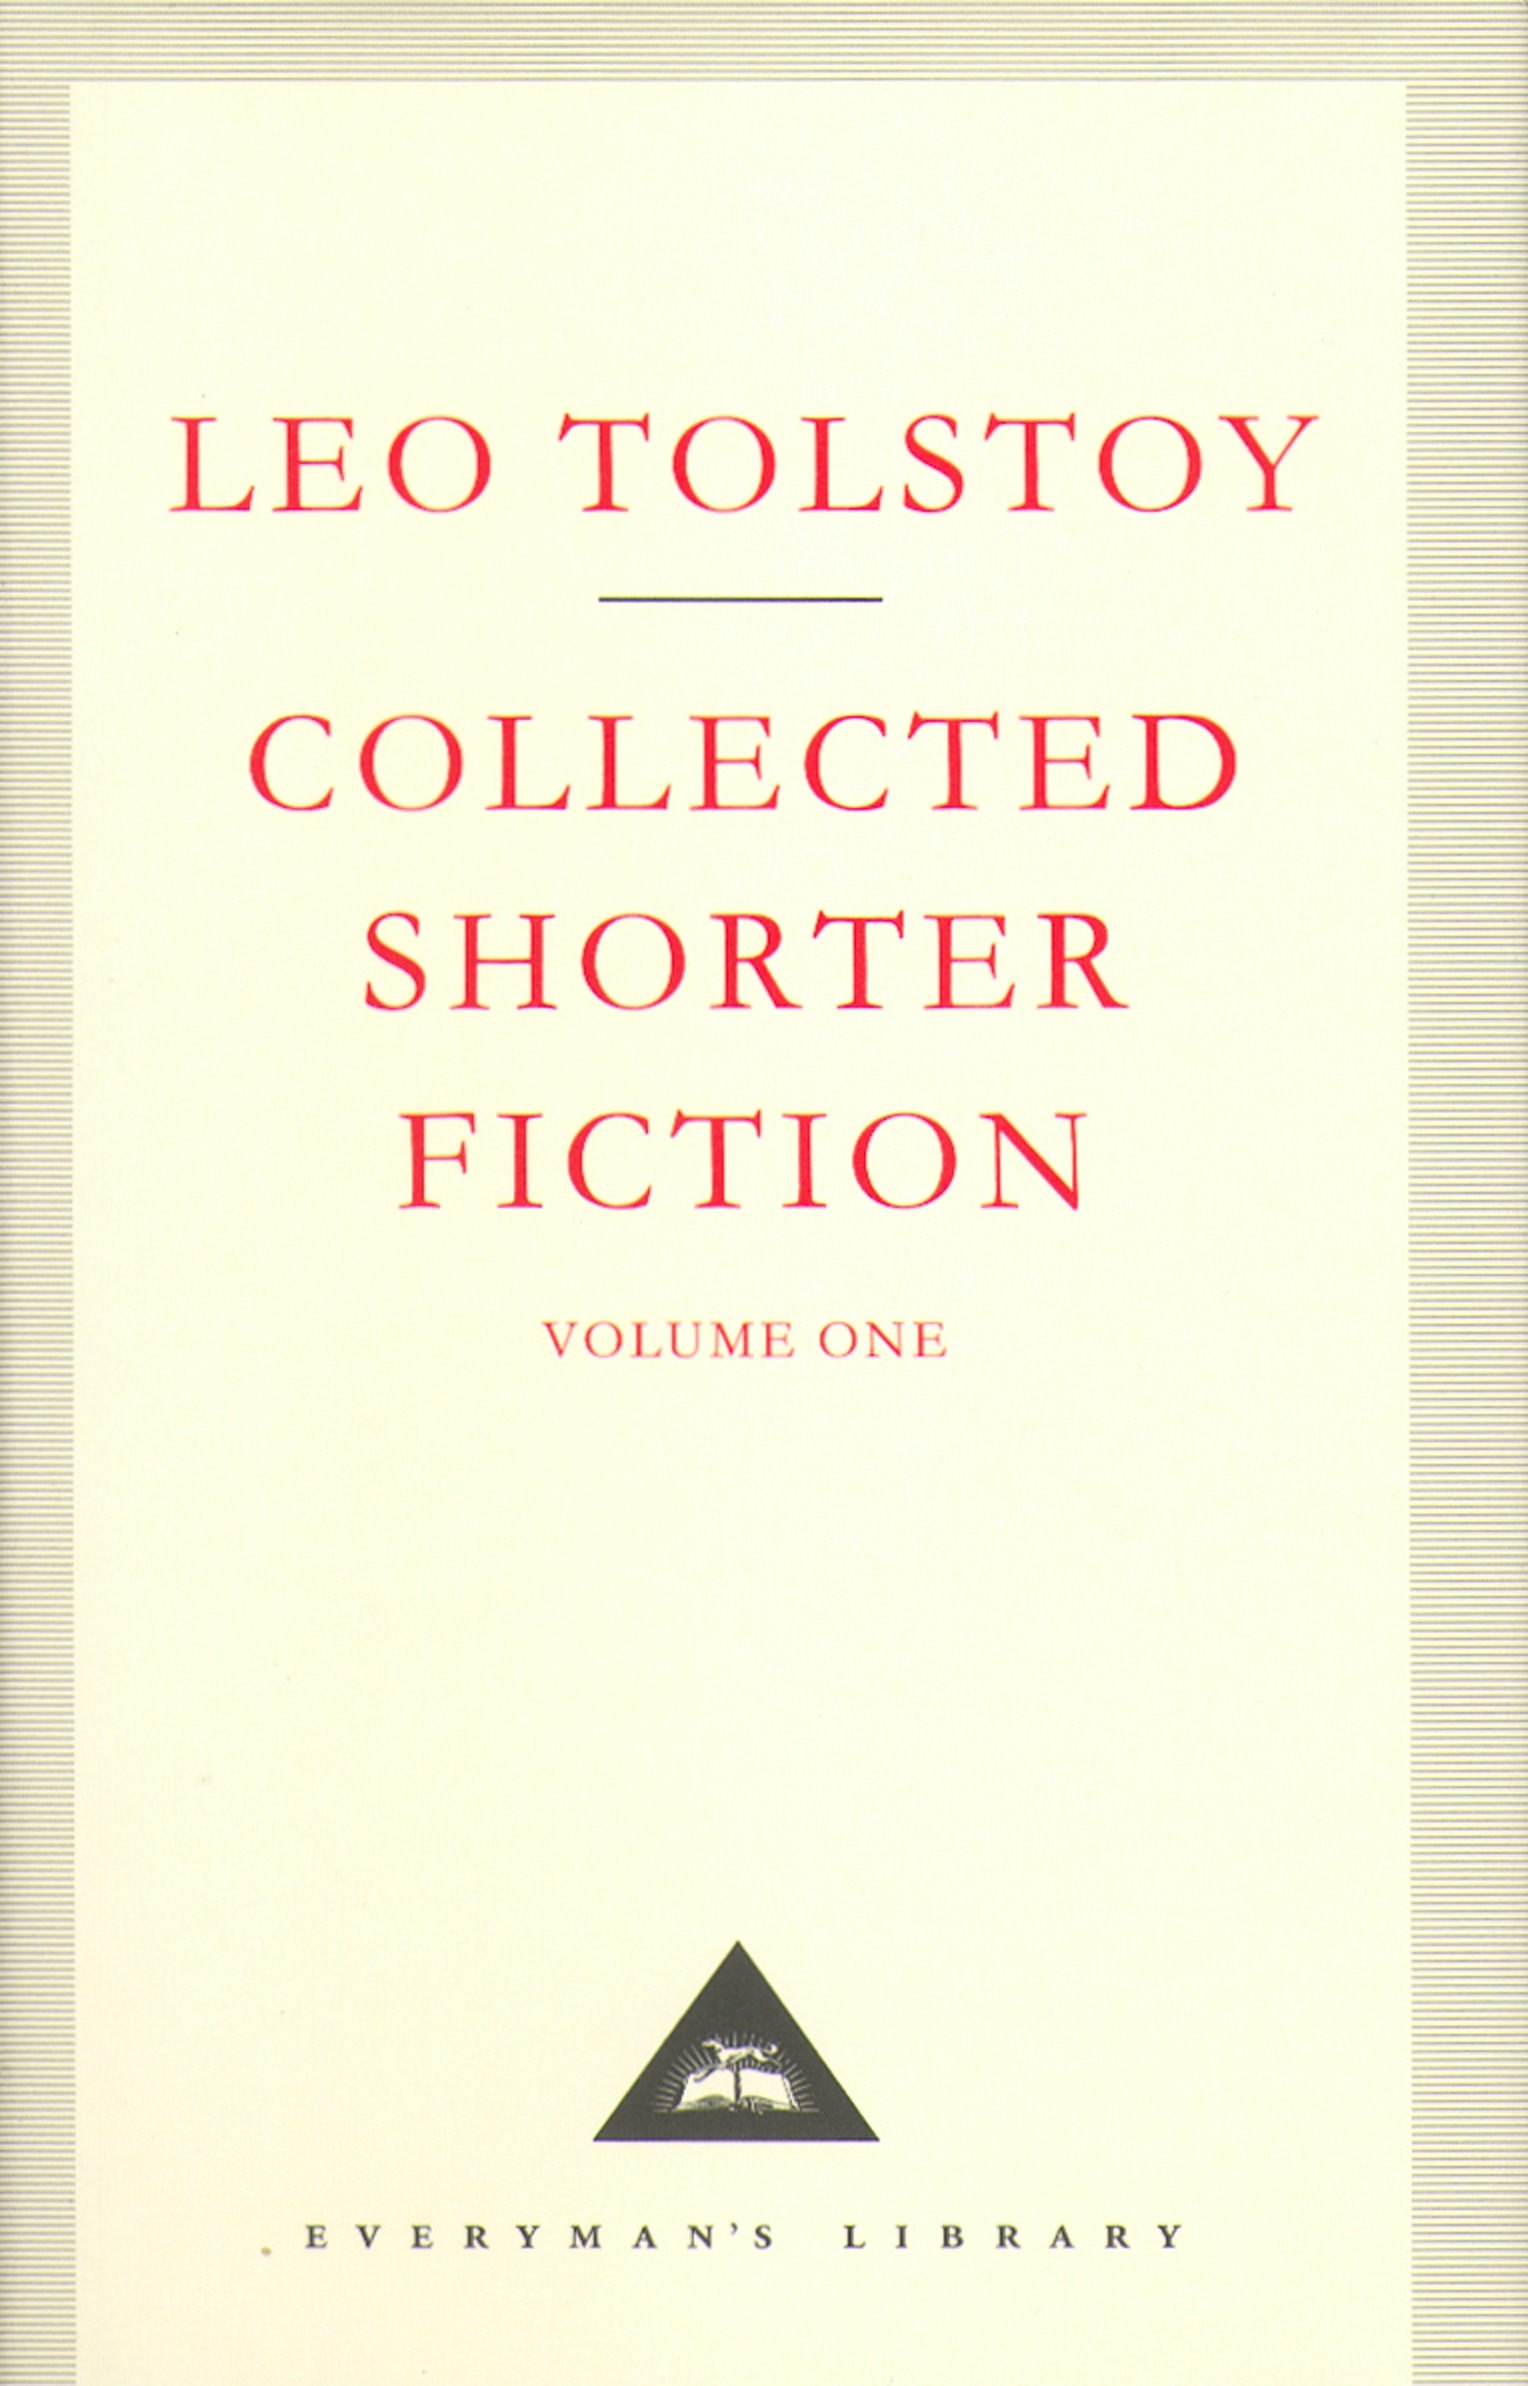 Book “Collected Shorter Fiction Volume 1” by Leo Tolstoy, John Oliver Bayley — October 26, 2001